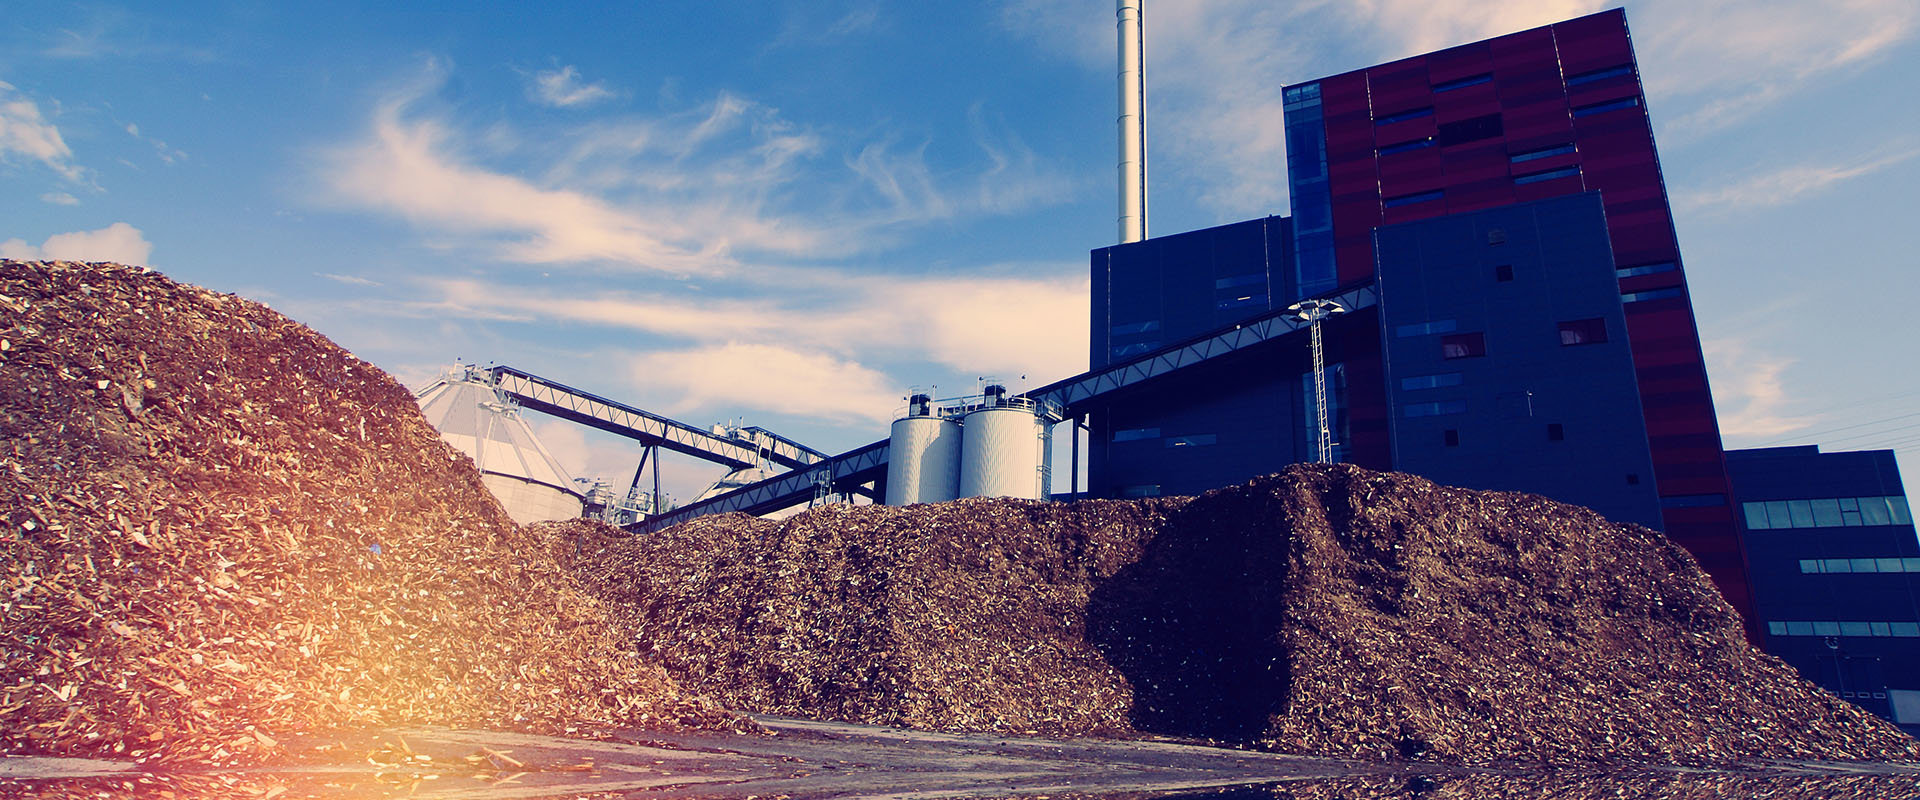 Image of biomass outside of a industrial building